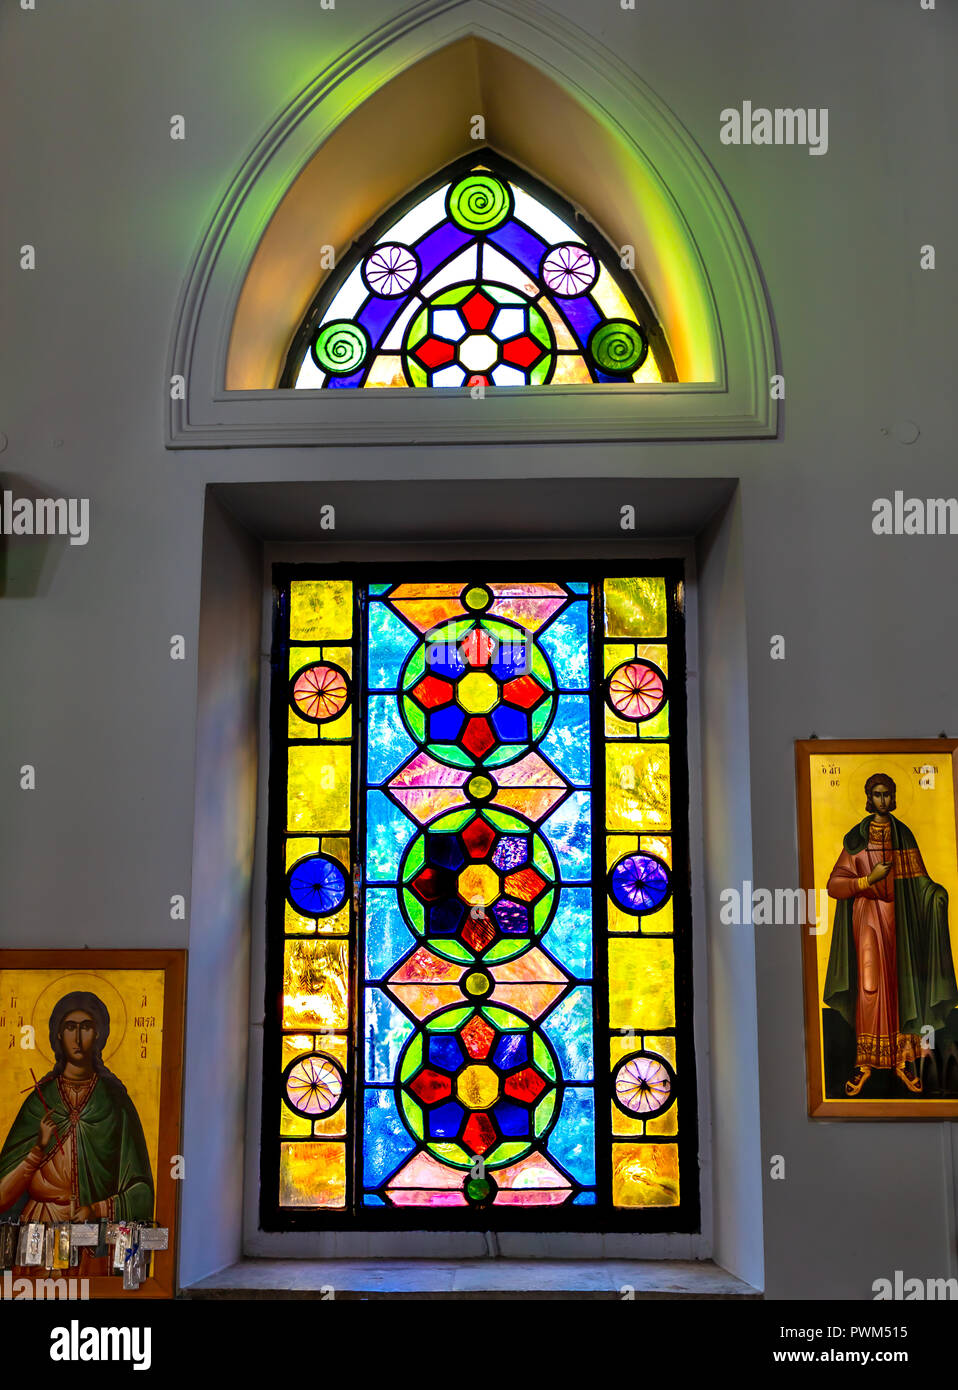 Old stain glass window in an alcove of the Church of Saint Titus. Stock Photo